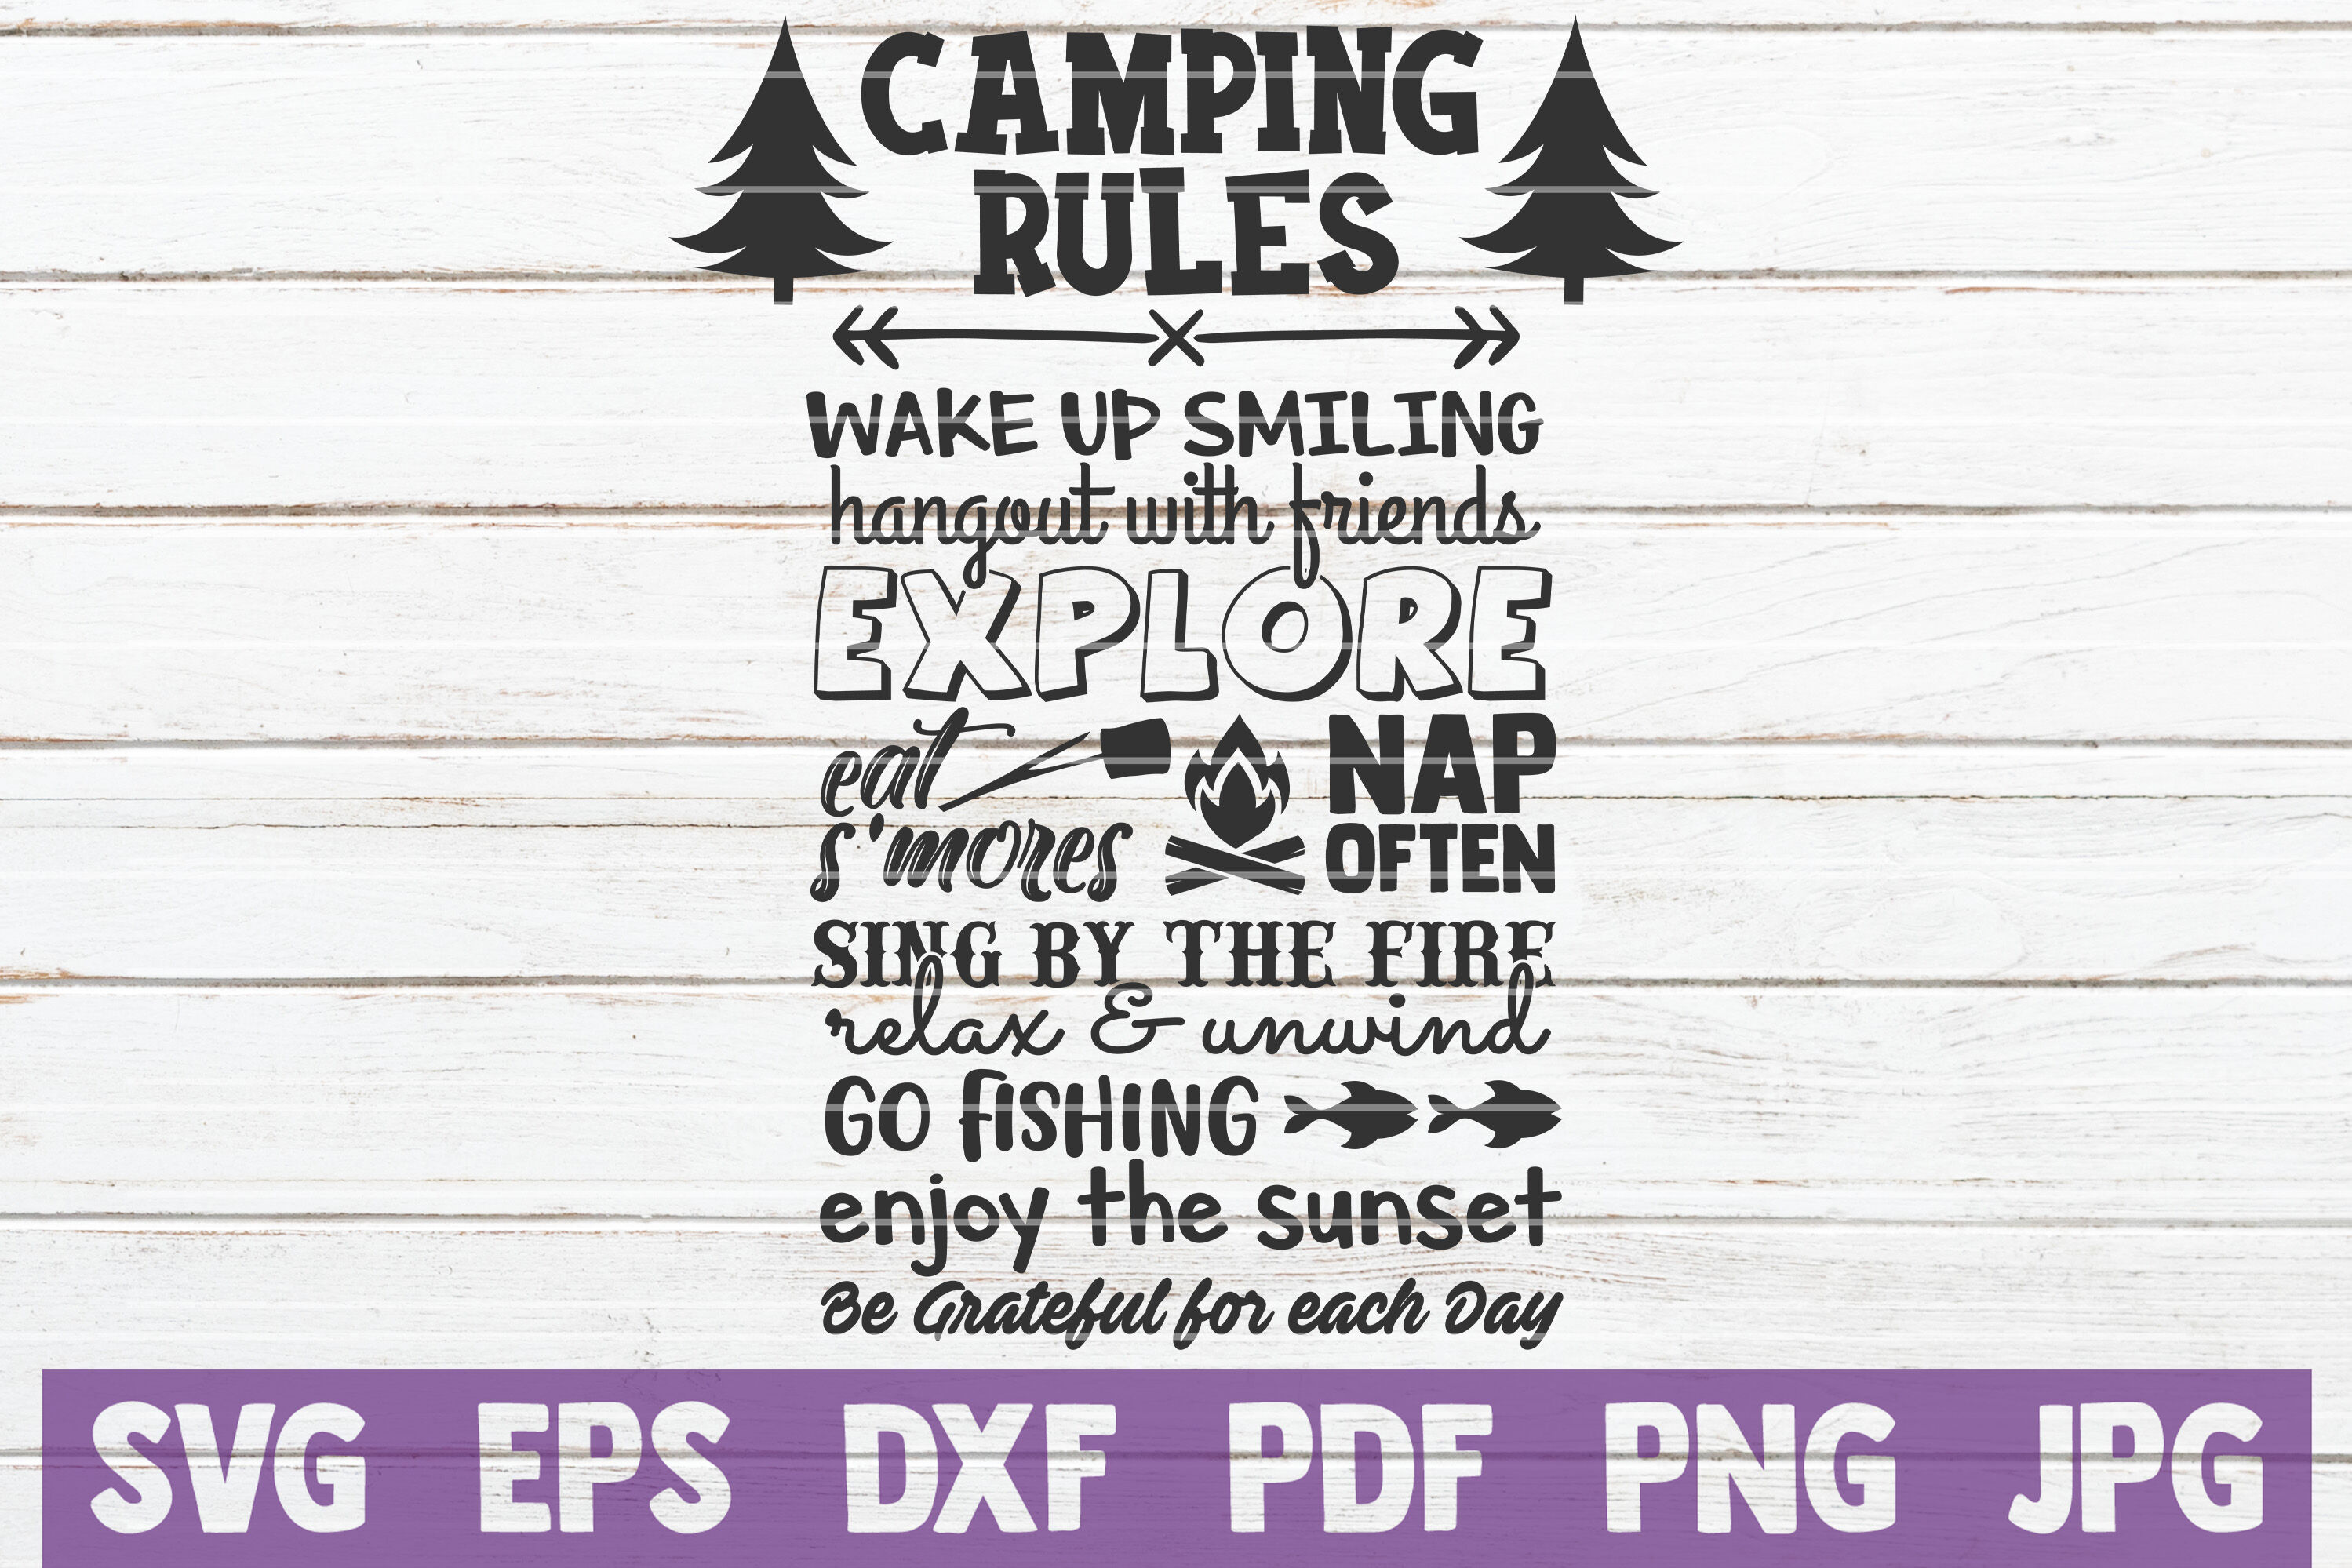 Campfire SVG Camping SVG Get Toasted SVG Campfire Sign Camping Sign Fire Sv...